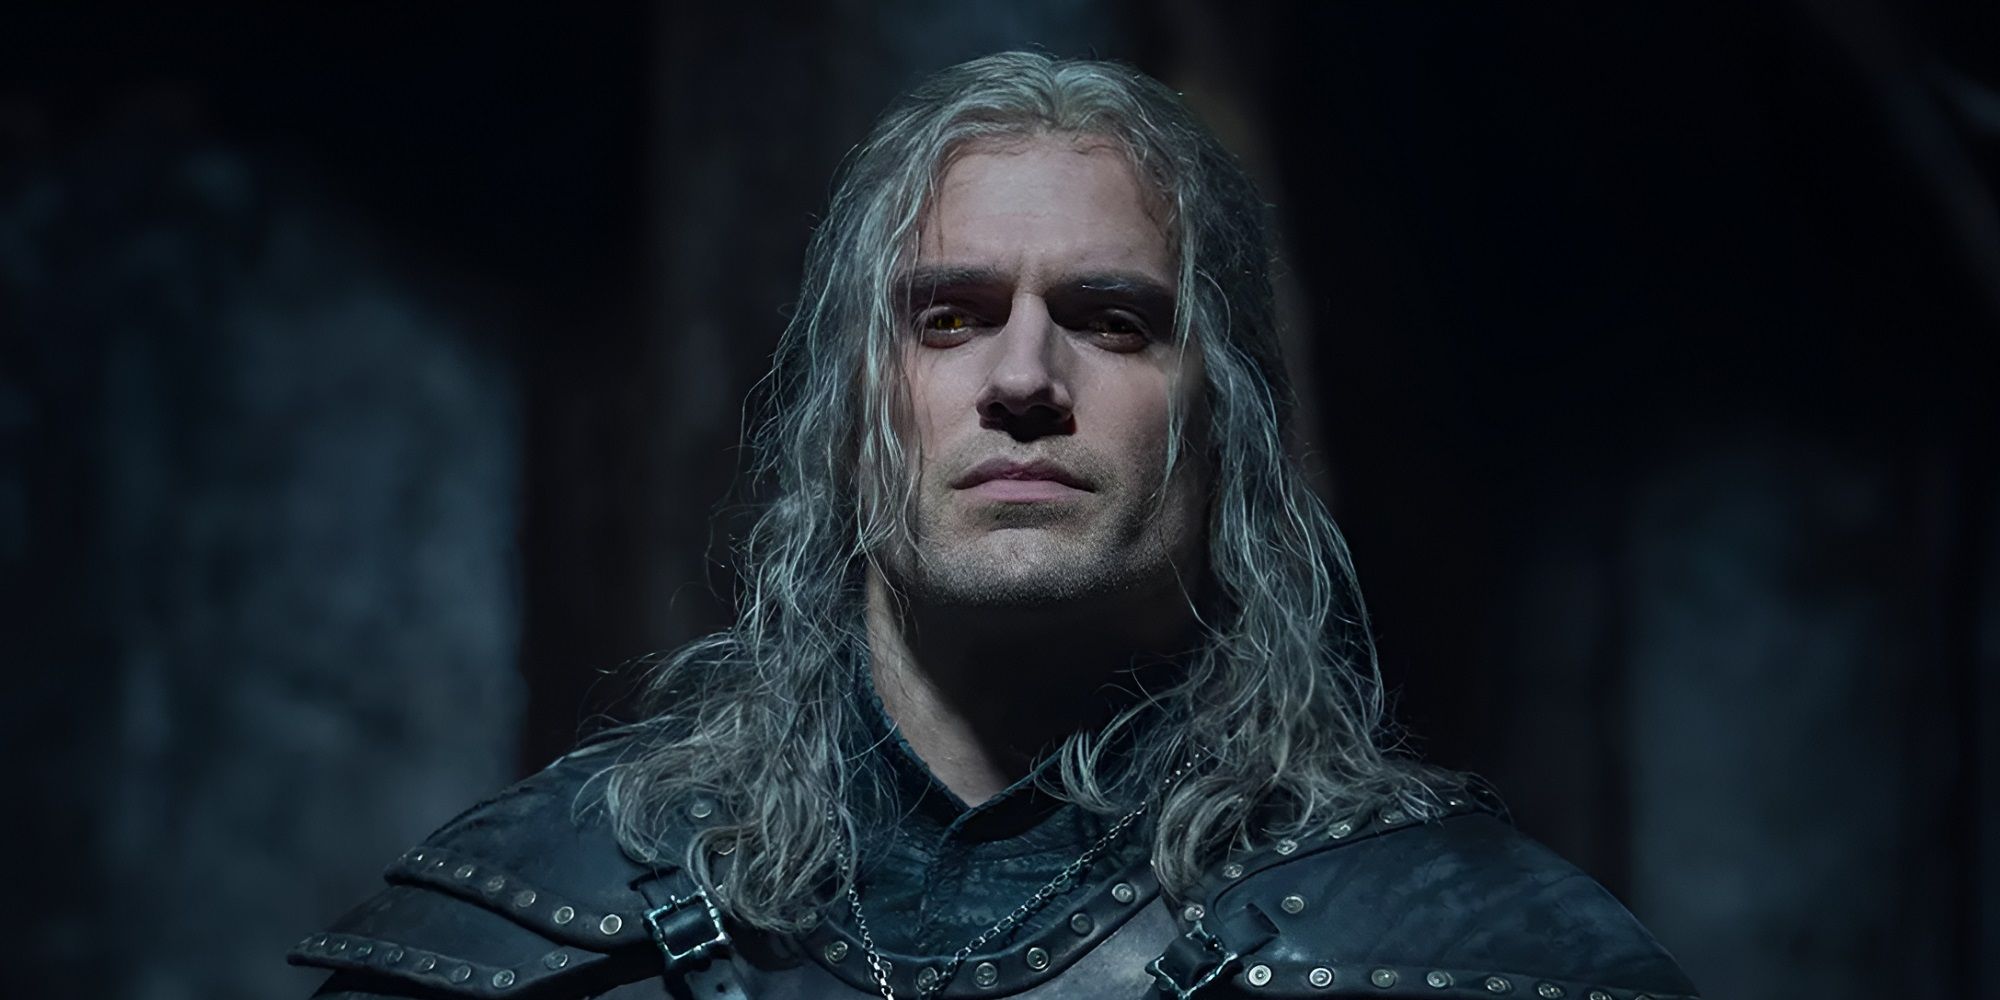 Henry Cavill as Geralt of Rivia in Netflix's The Witcher.